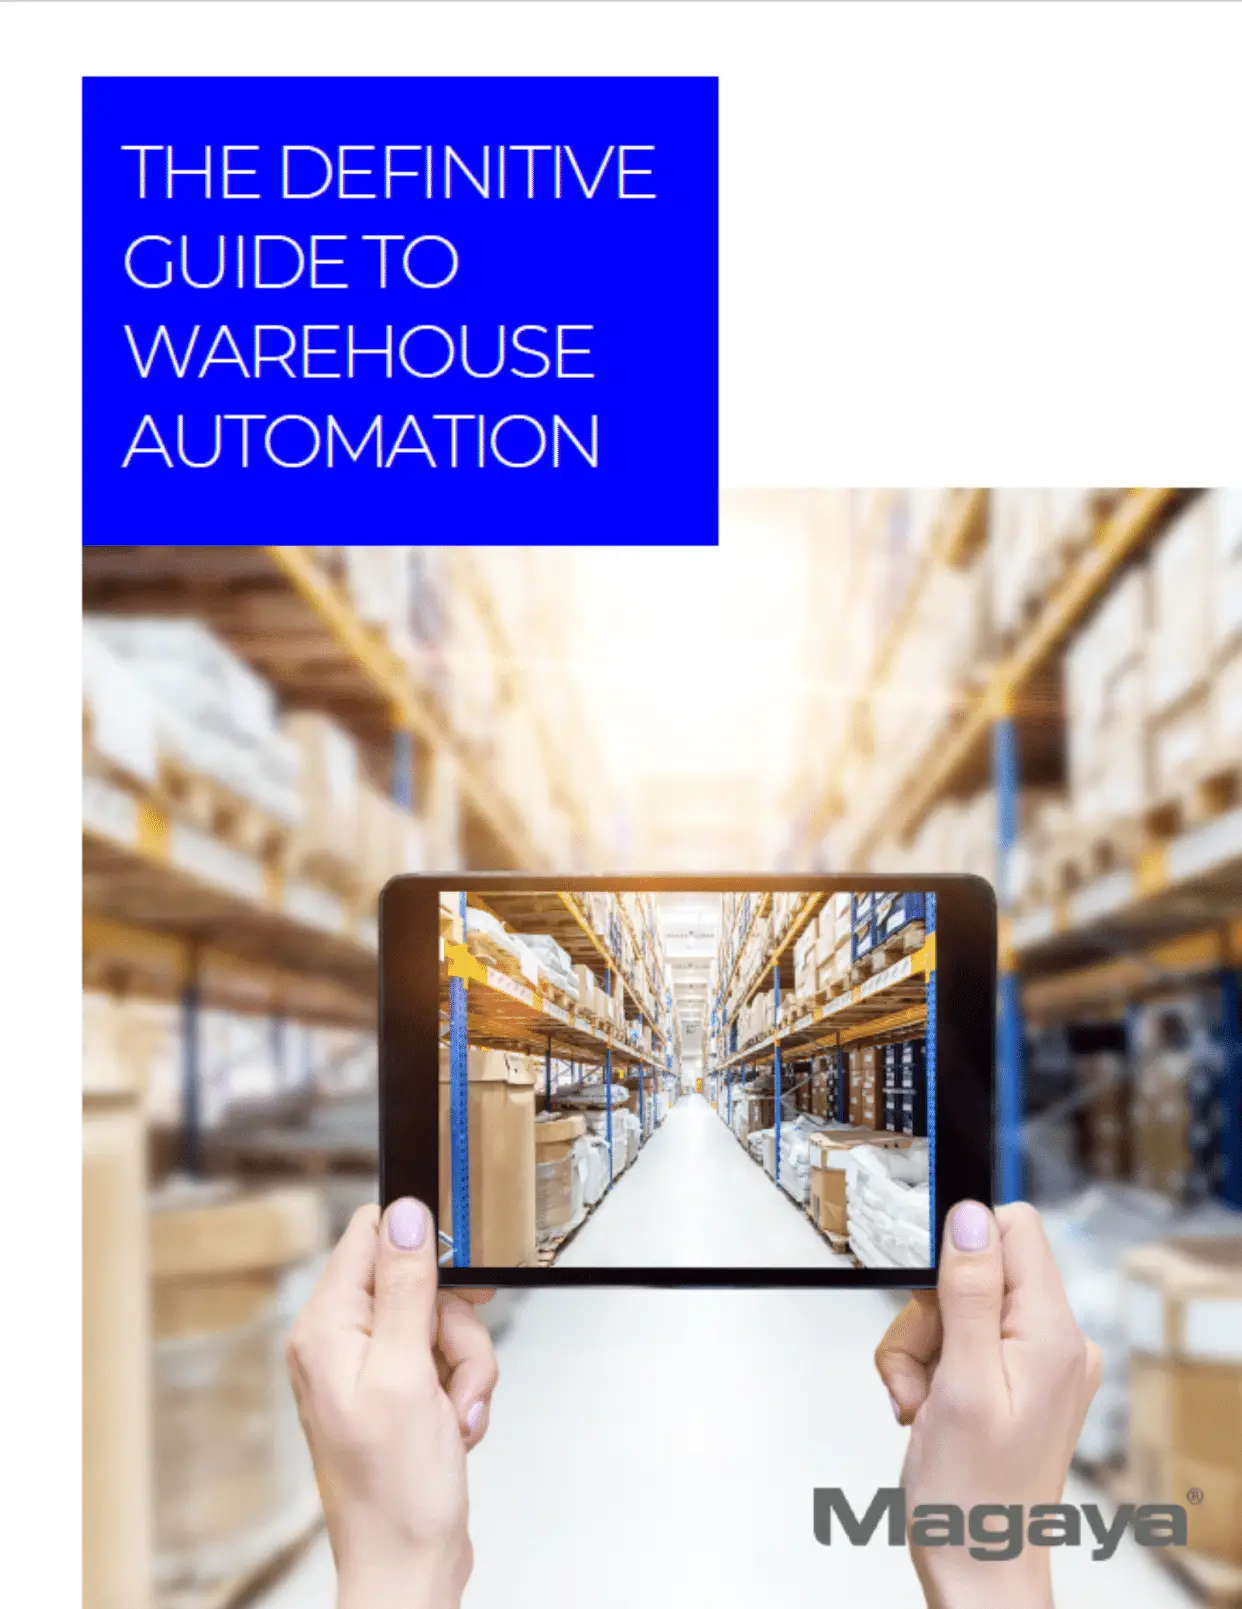 Warehouse Automation Guide Cover